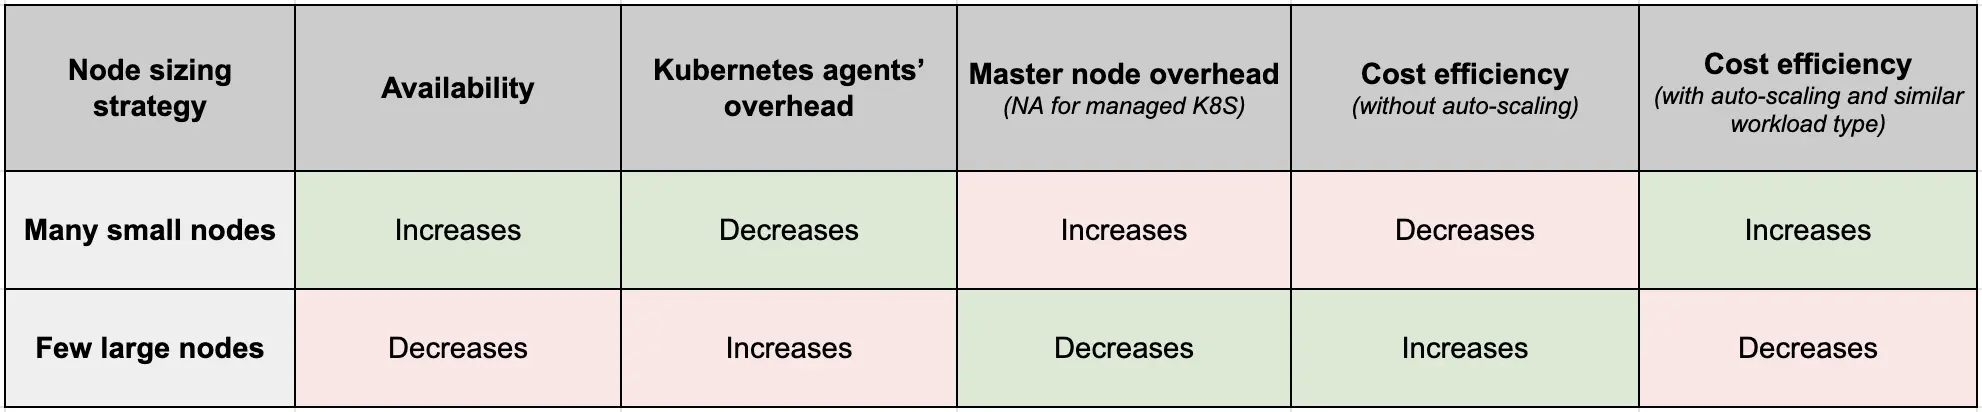 Node sizing and cost efficiency with autoscaling